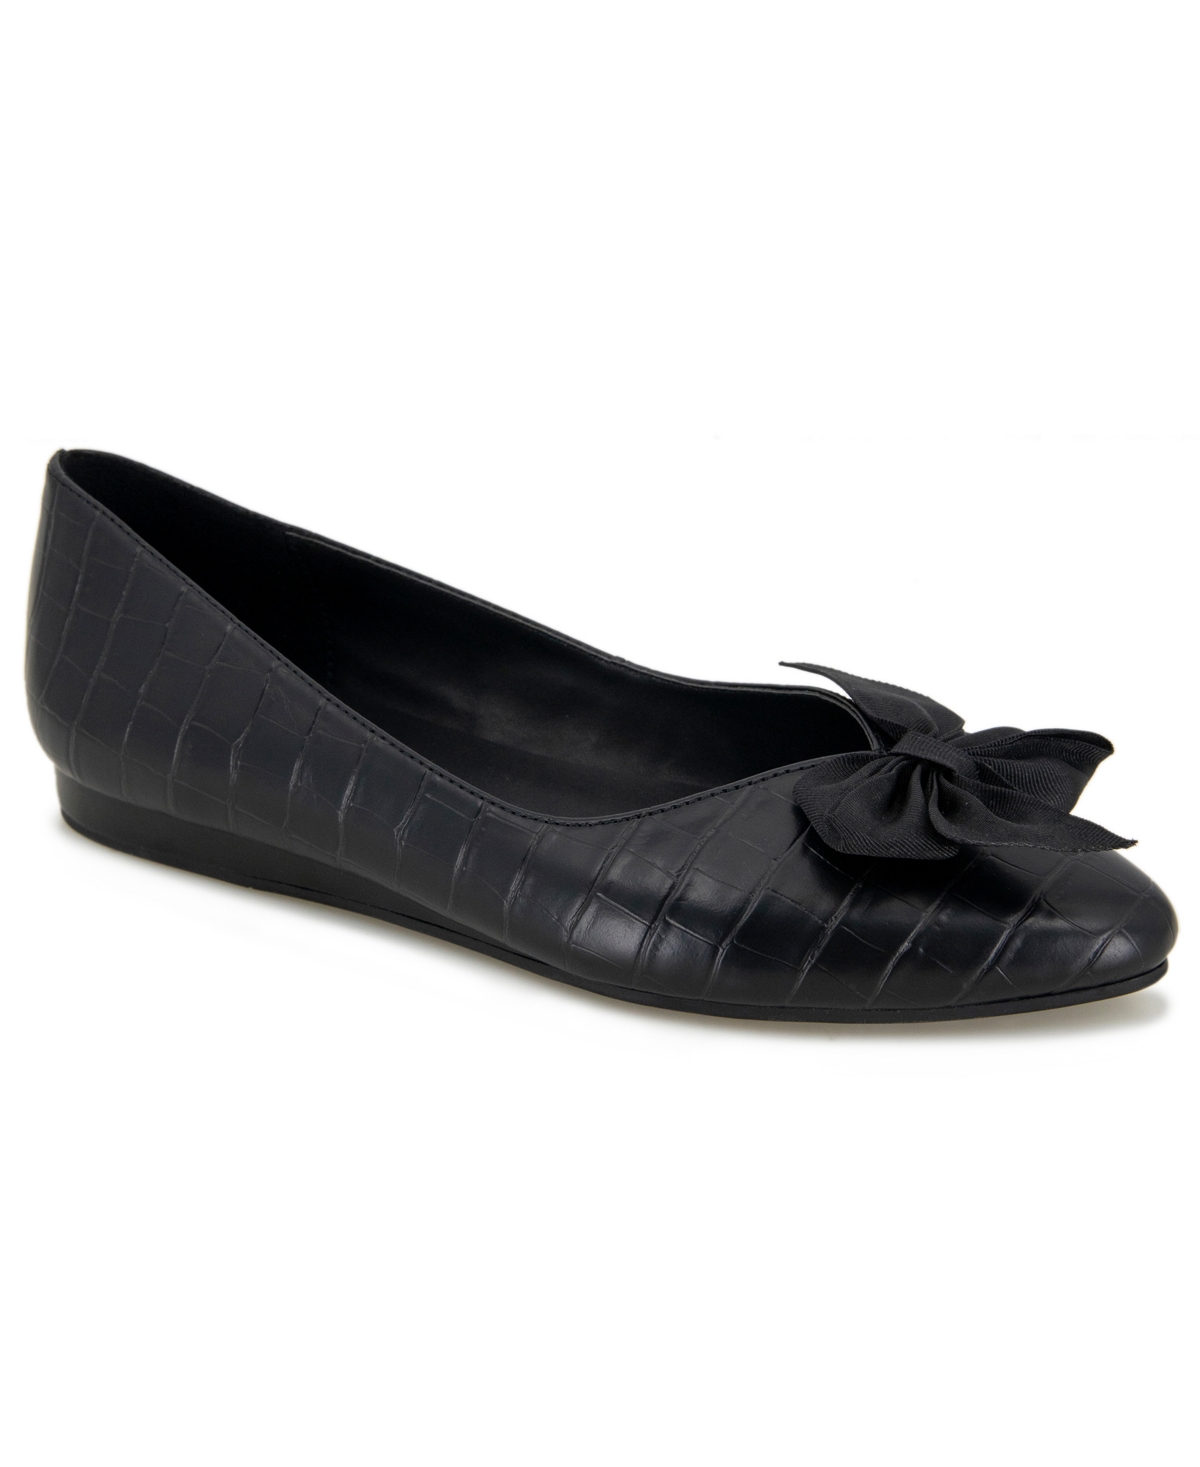 KENNETH COLE REACTION WOMEN'S LILY BOW BALLET FLATS